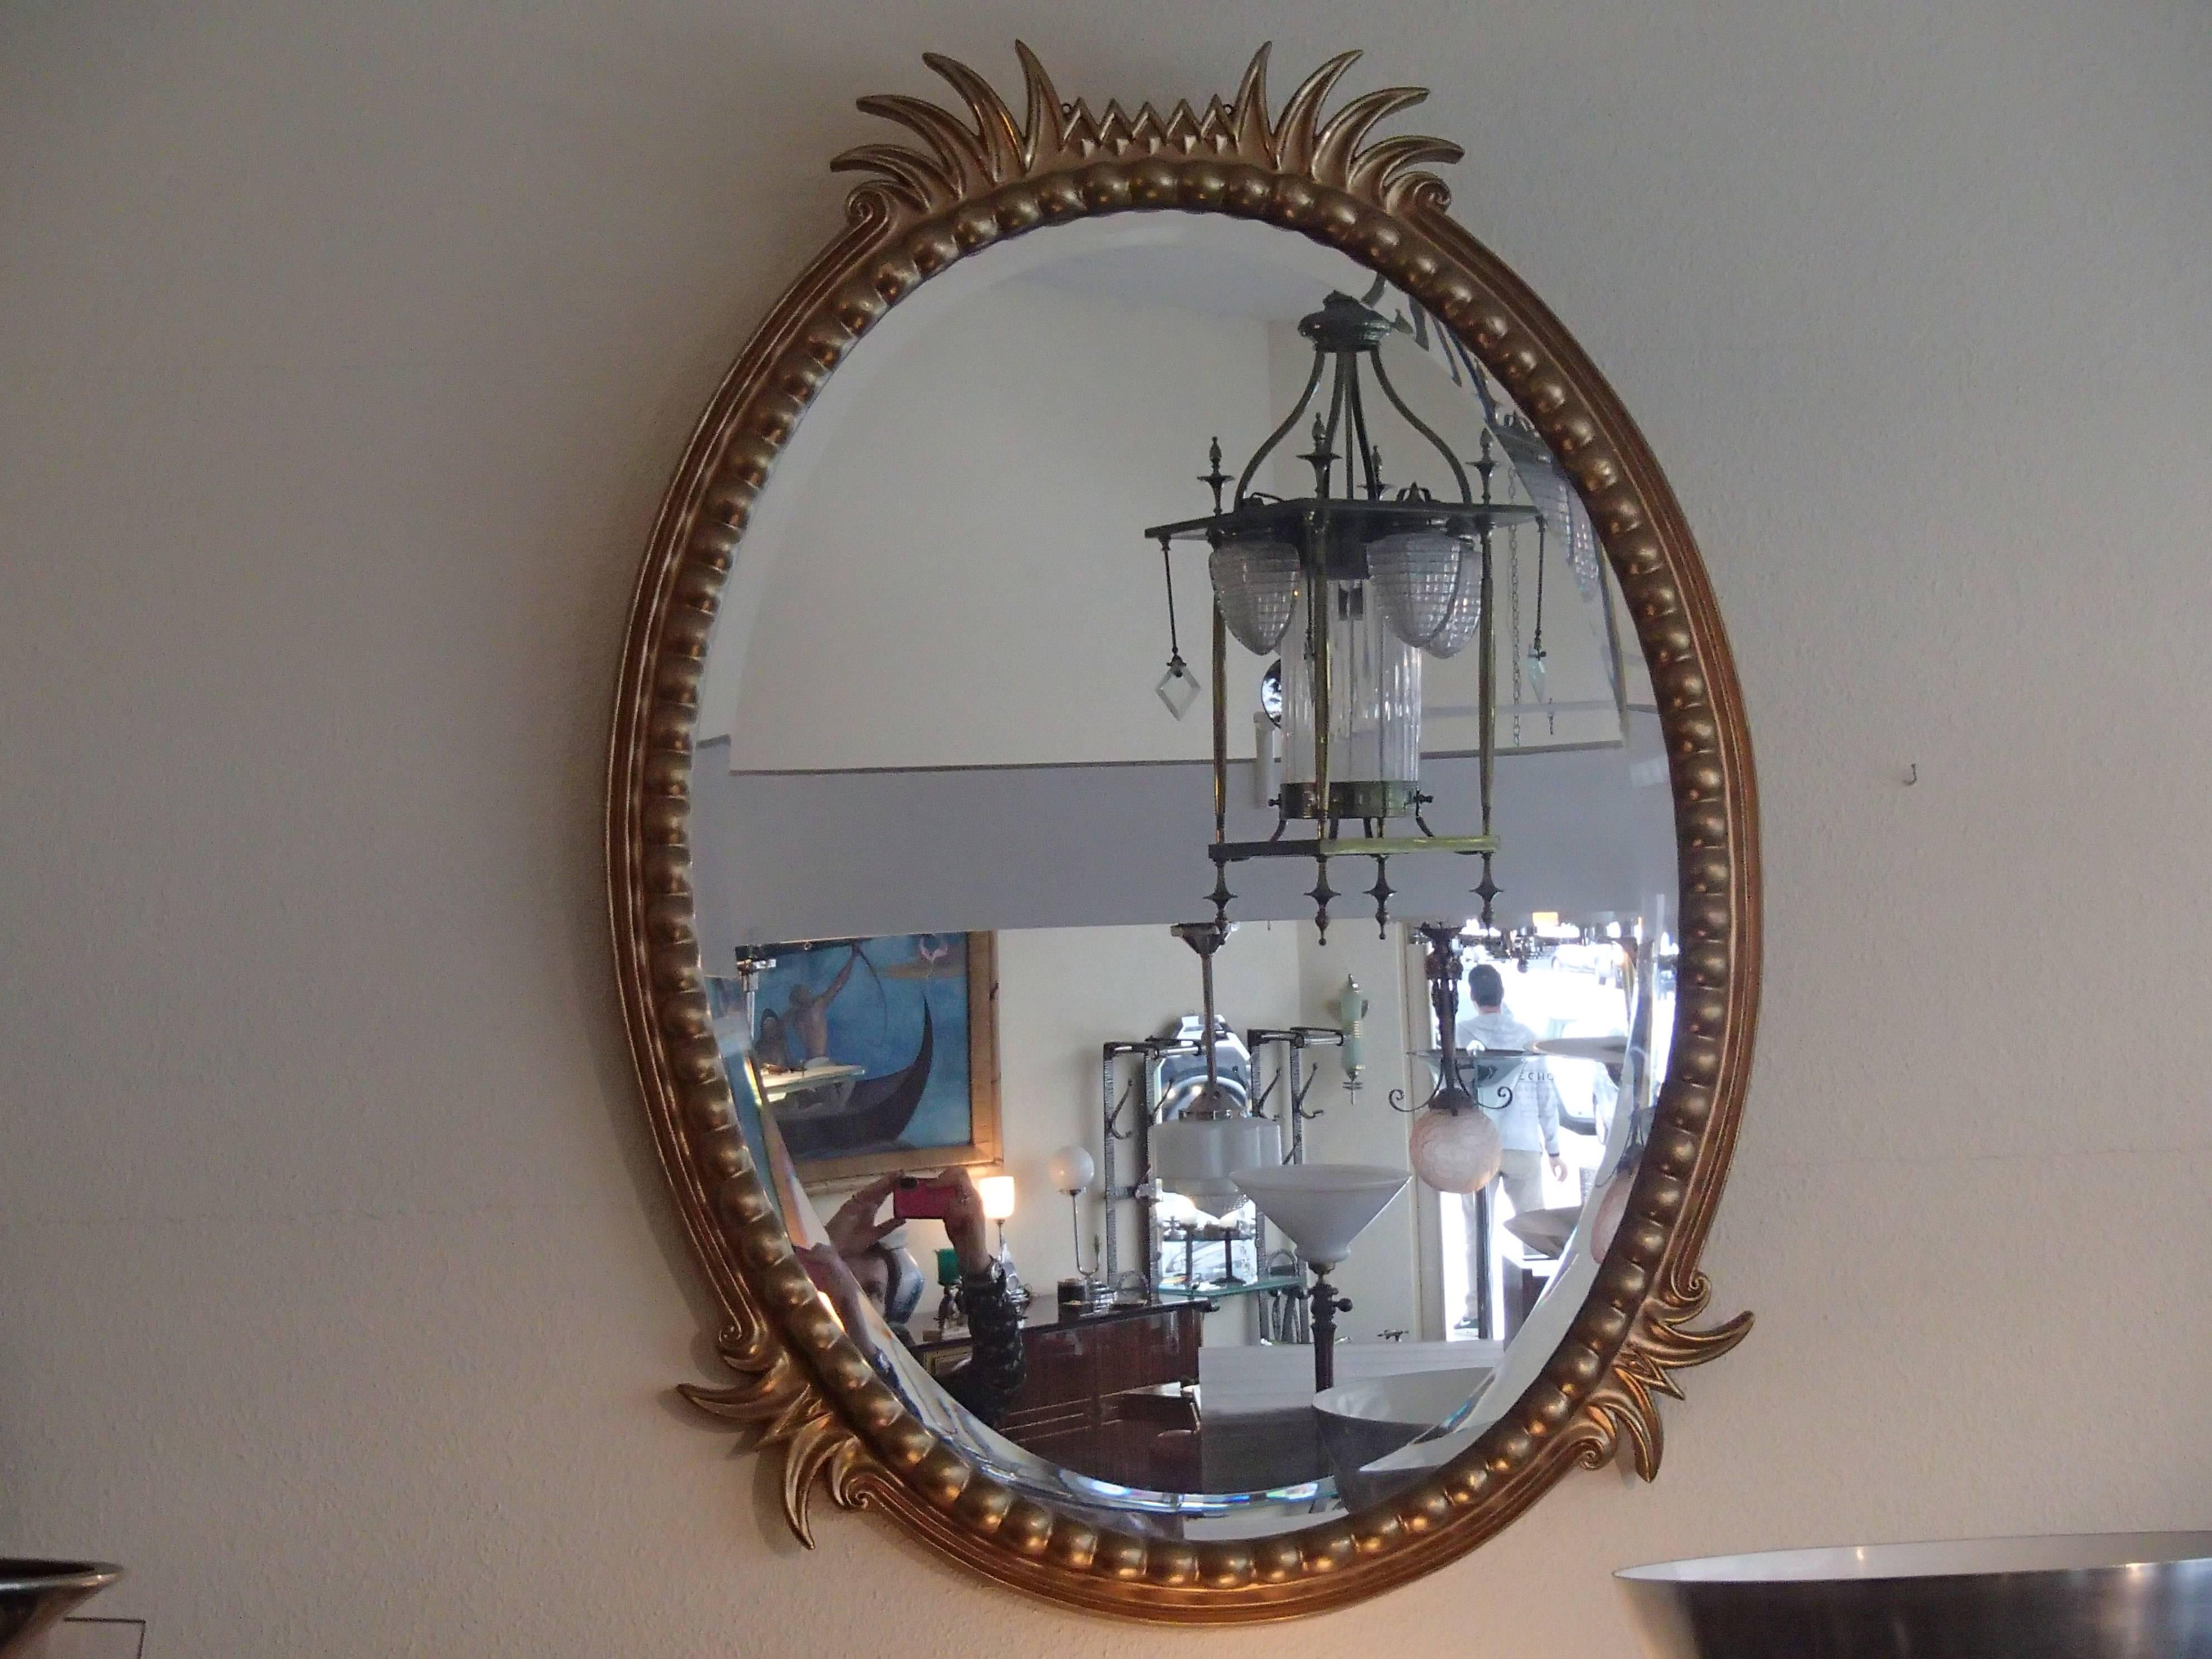 Very beautiful and hughes frame with new oval mirror with facette.